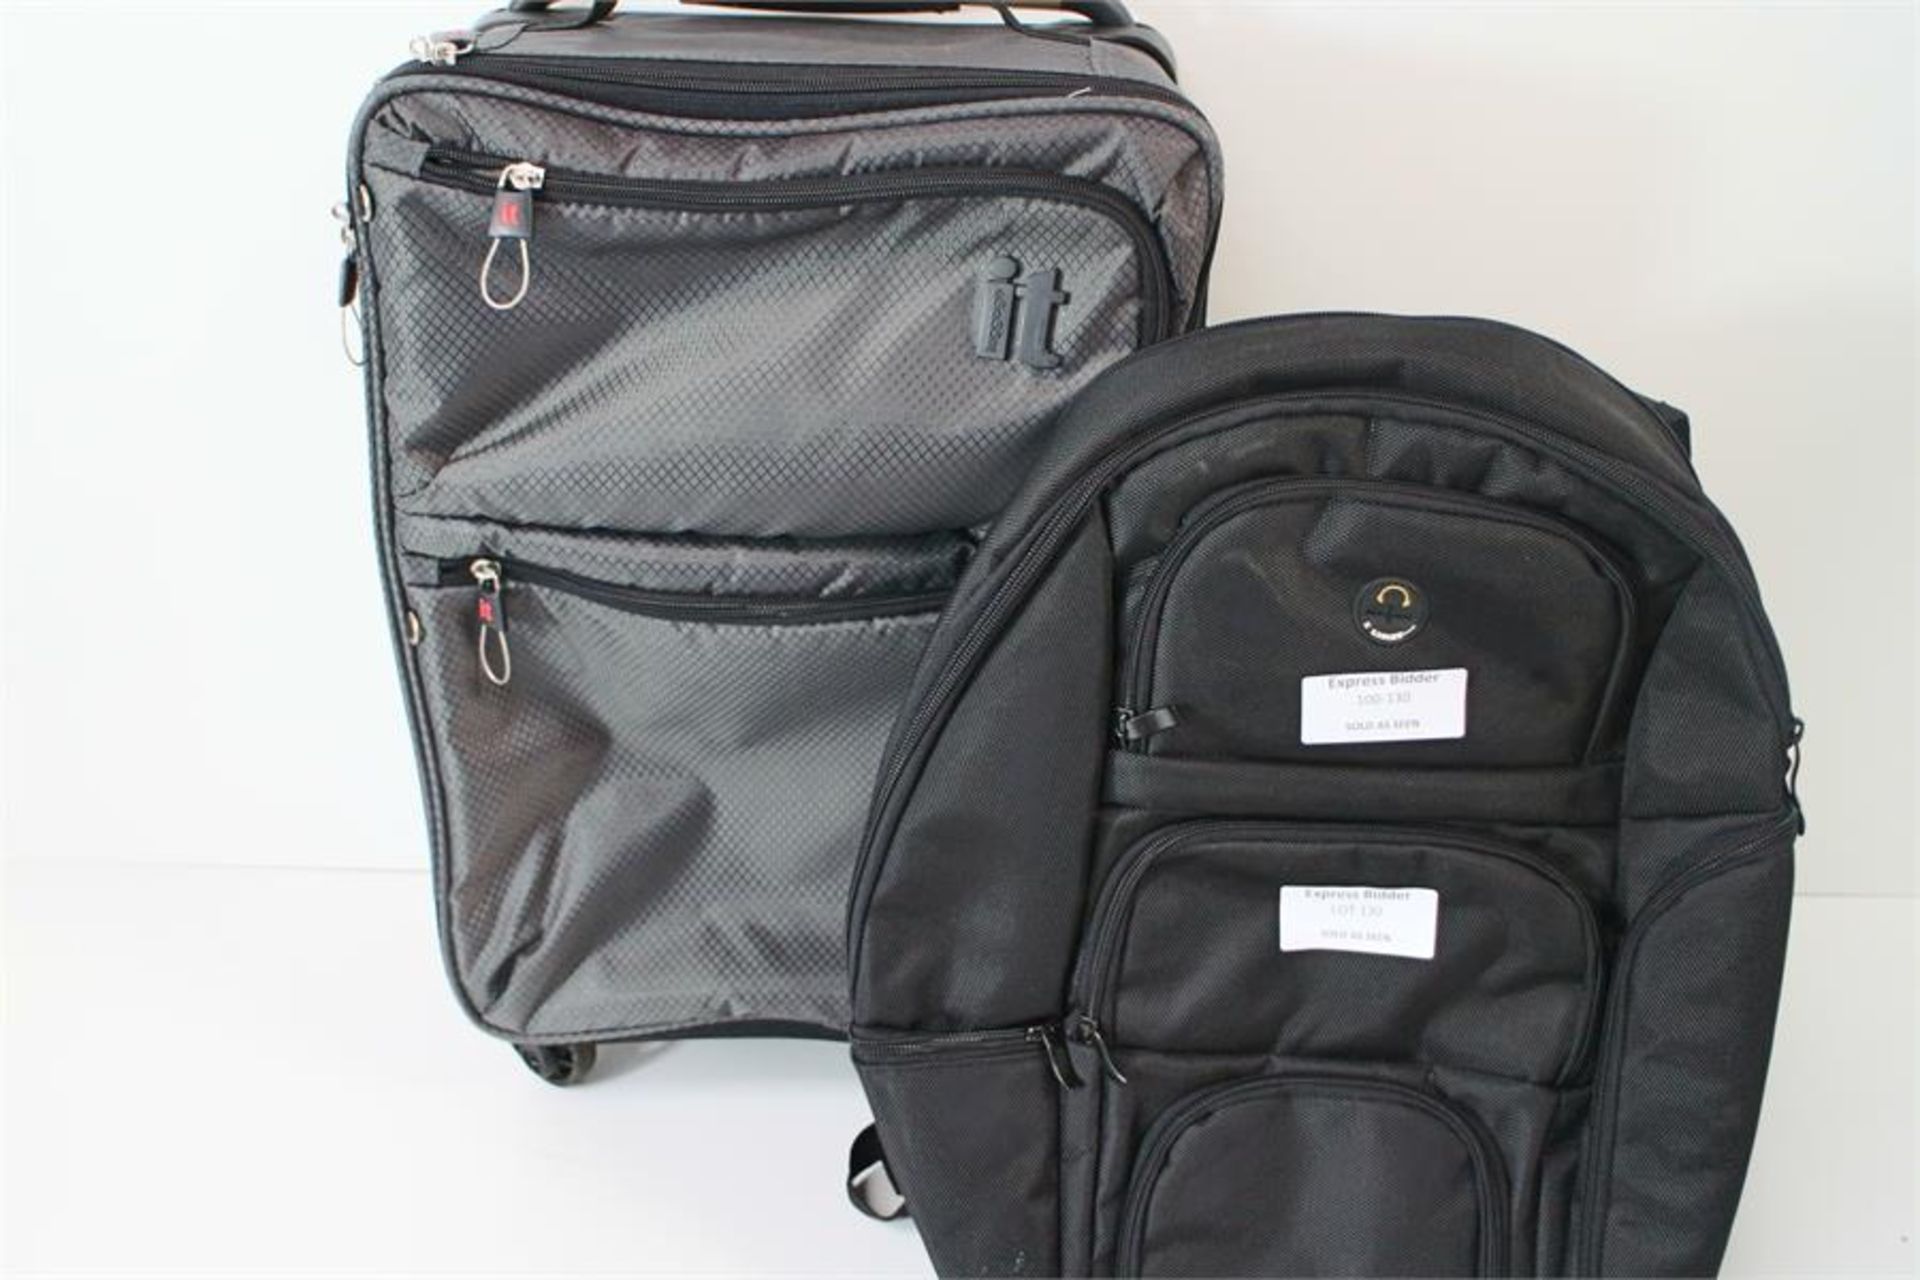 Lot of 2 Items - Business Backpack & Hang Luggage